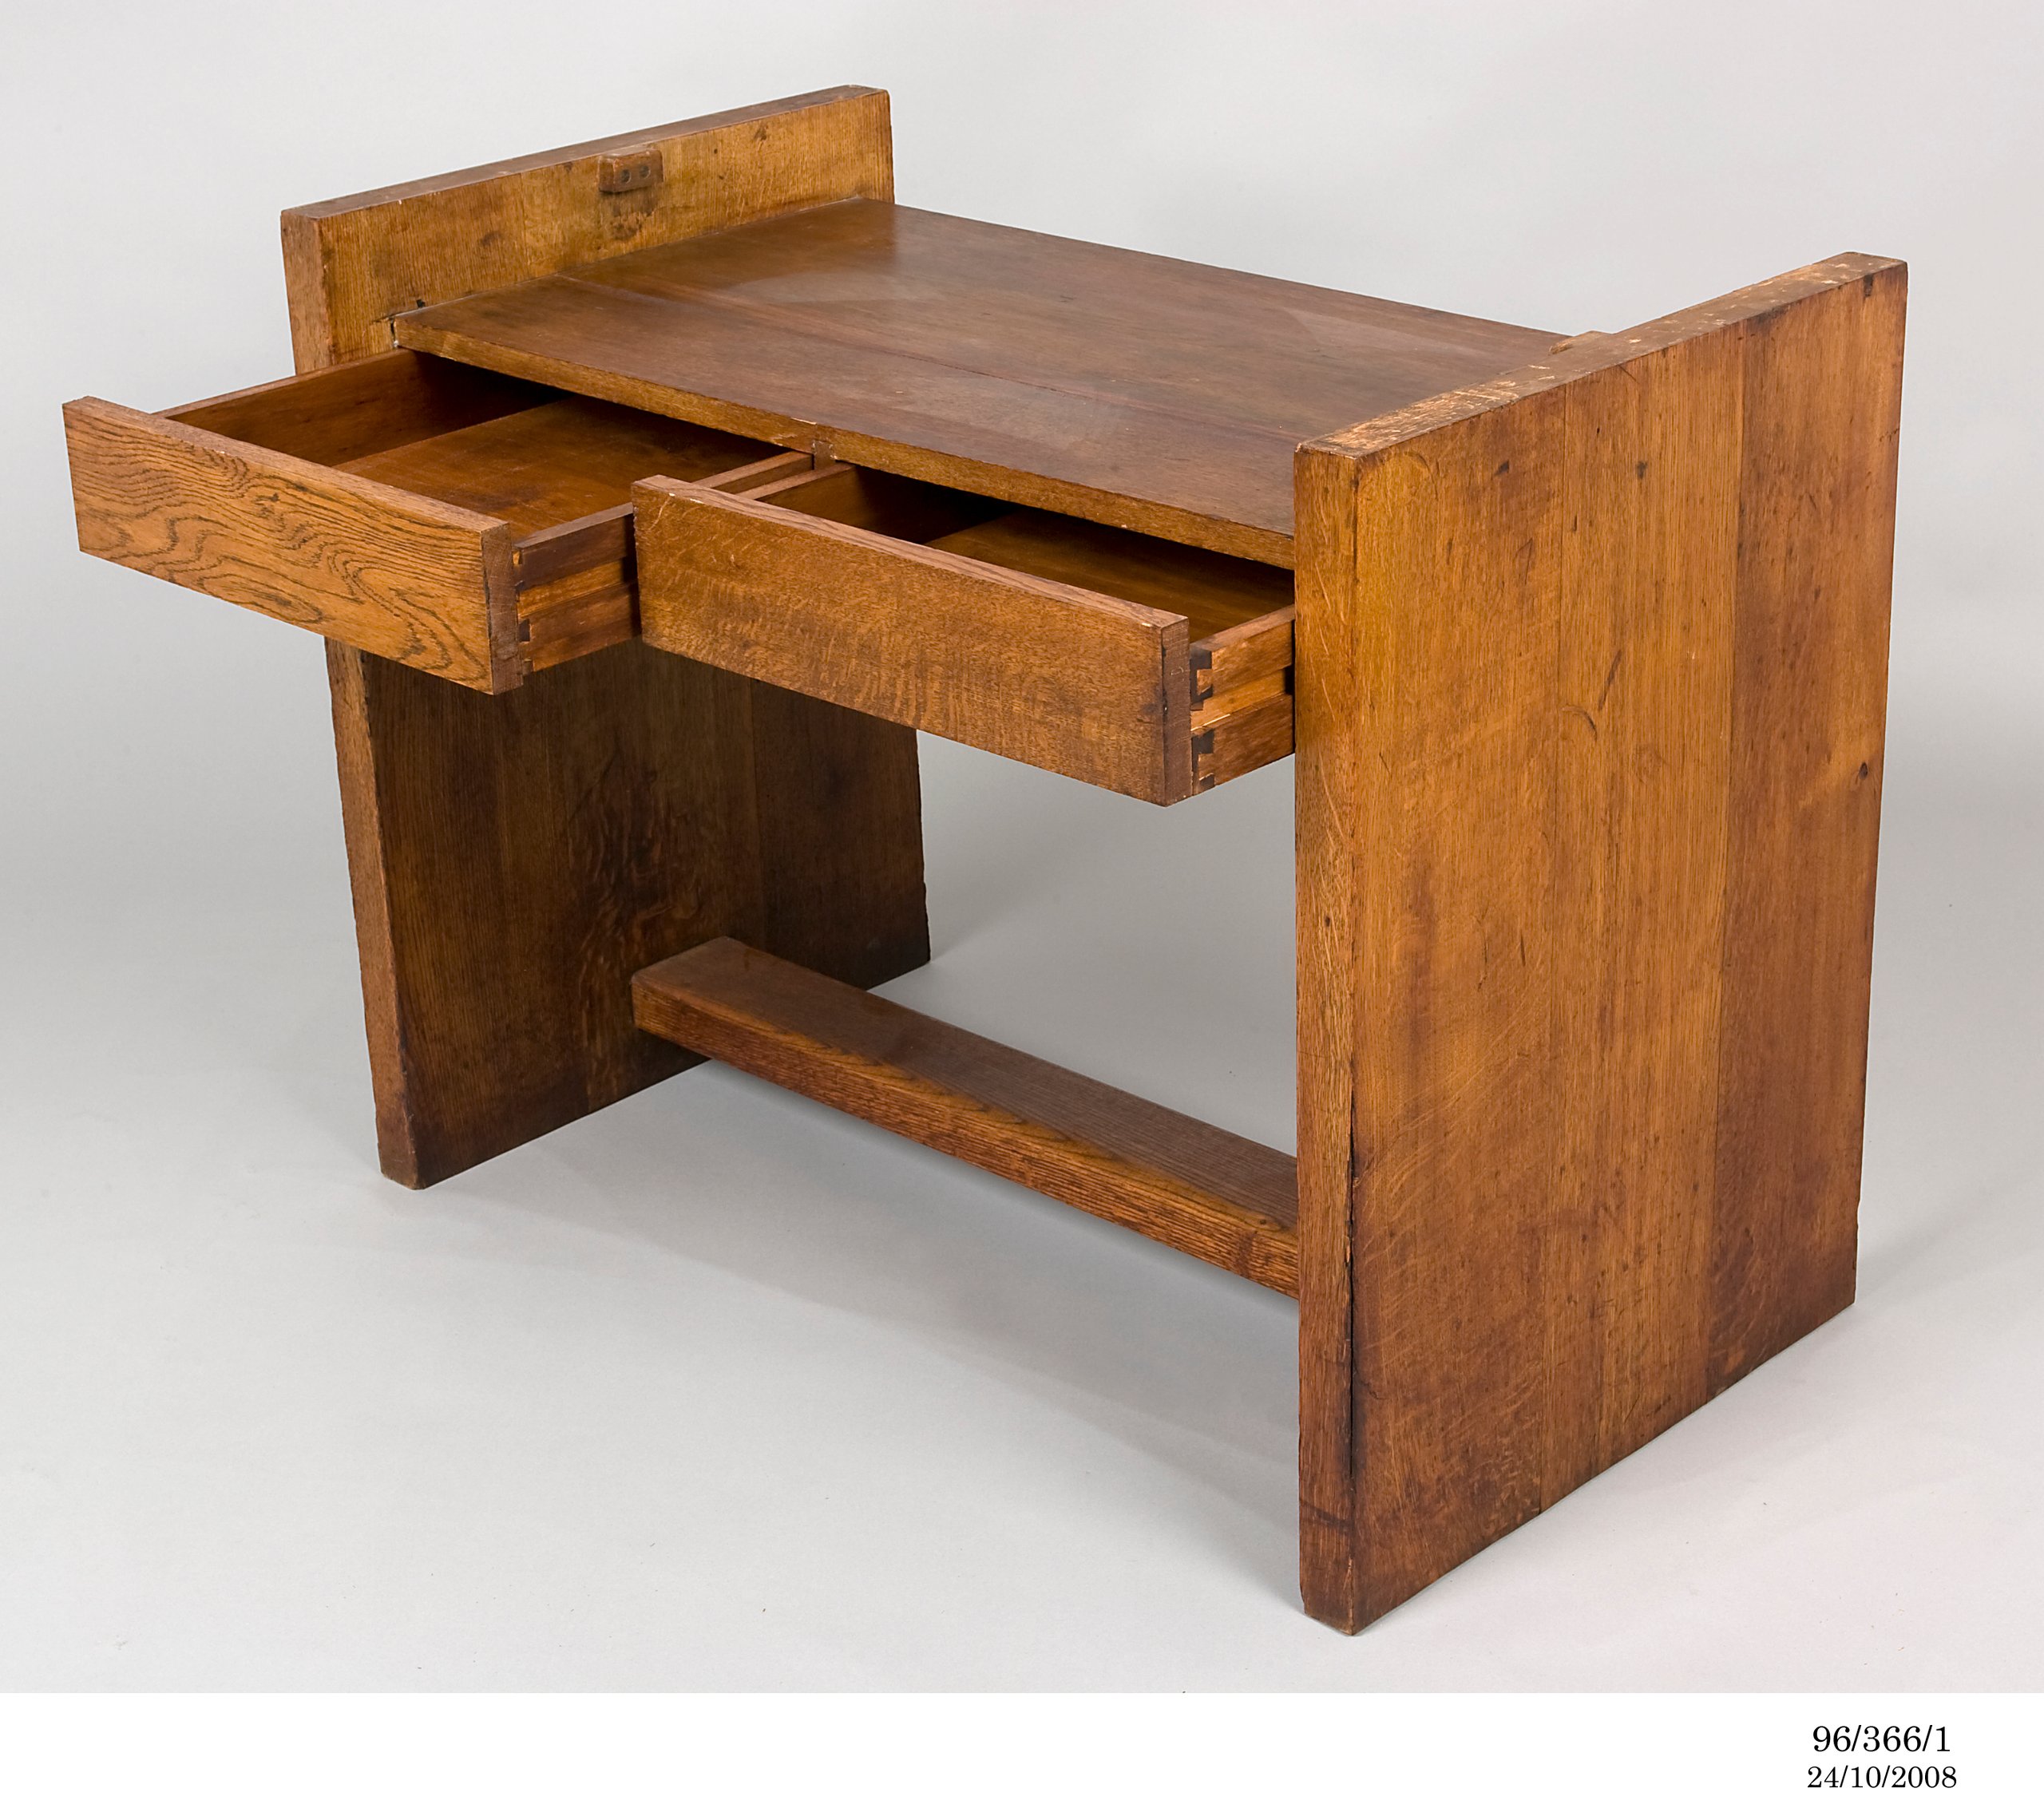 Study table designed by Marion Mahony and Walter Burley Griffin